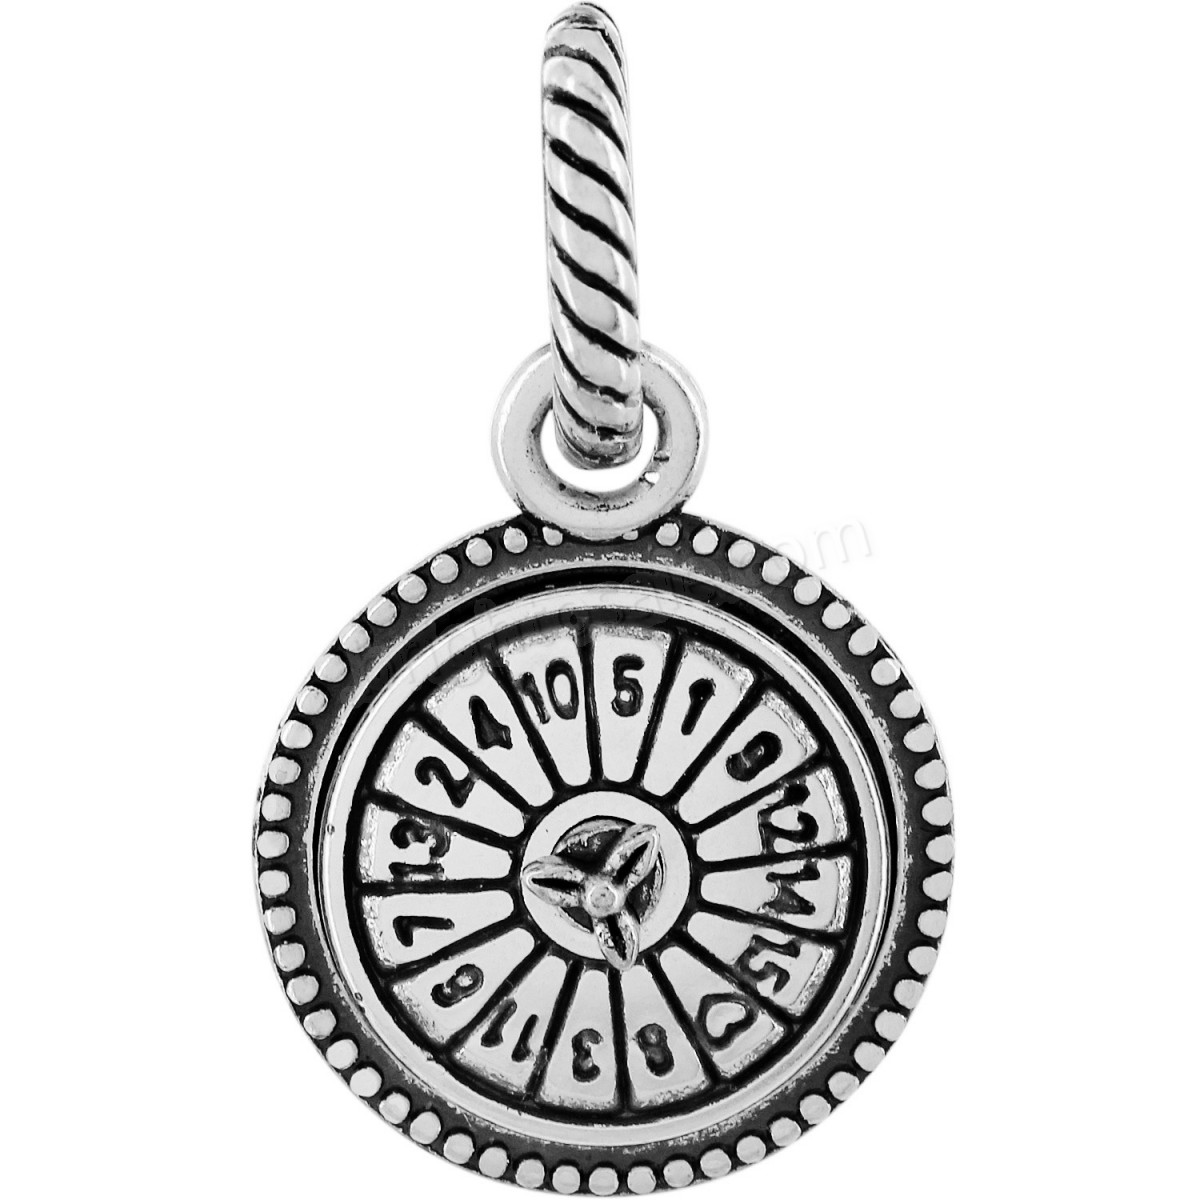 Brighton Collectibles & Online Discount Clink Charm - -0